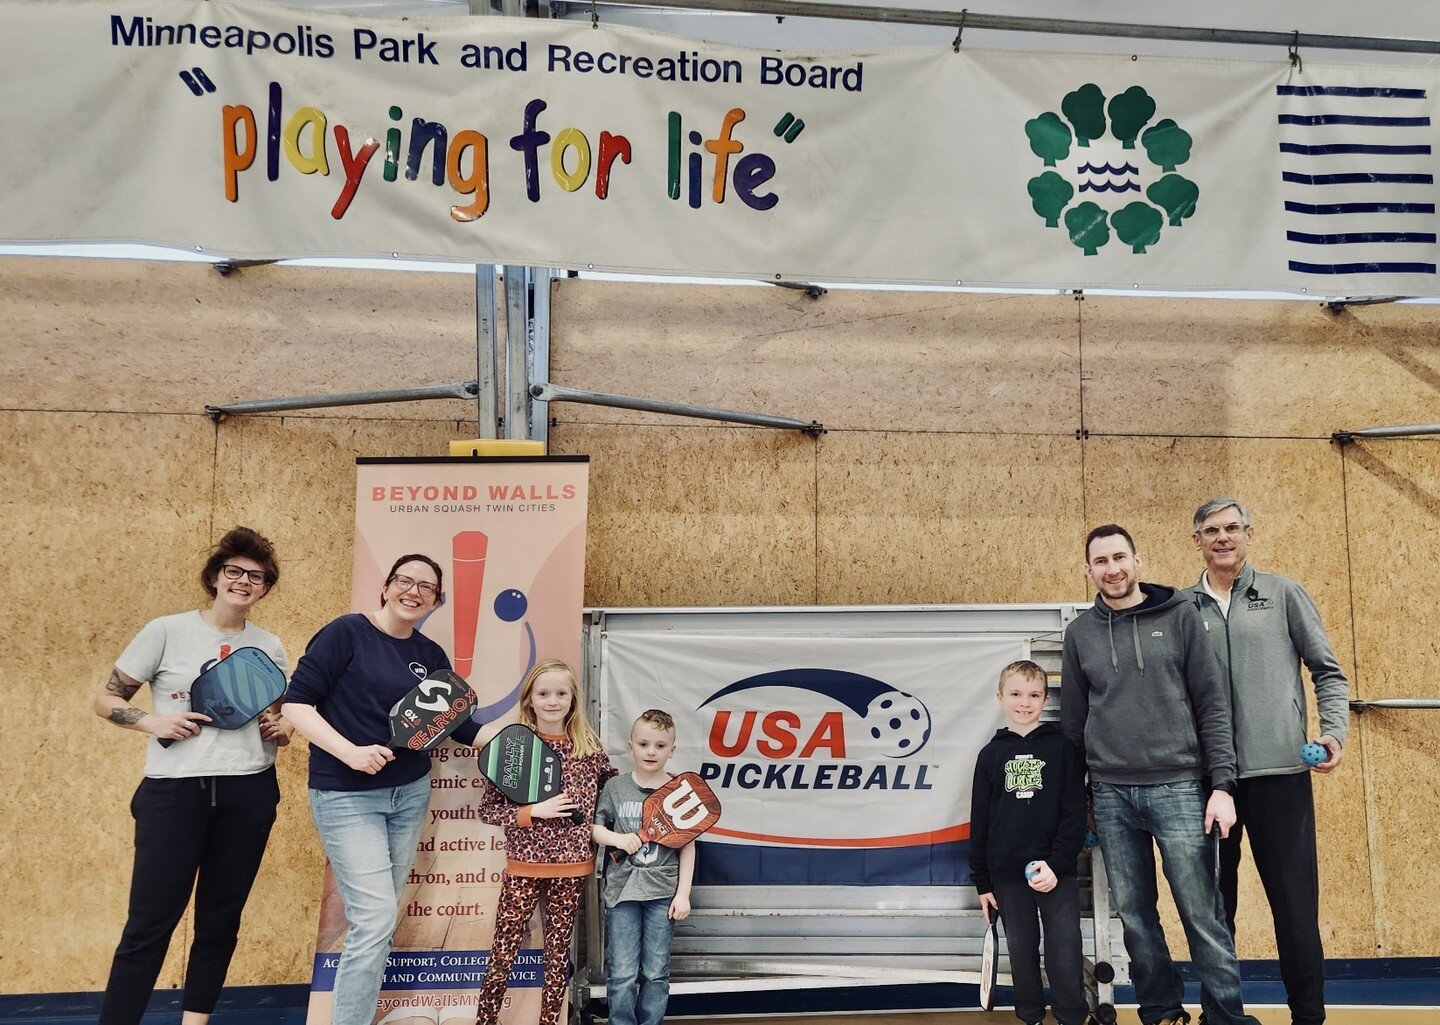 Our community pickleball clinics through @minneapolisparks and University of Minnesota PARKS Study have been a blast! Here are a few of our youngest drop ins and their families from last weekend at Bottineau Rec Center. We're excited to offer more op